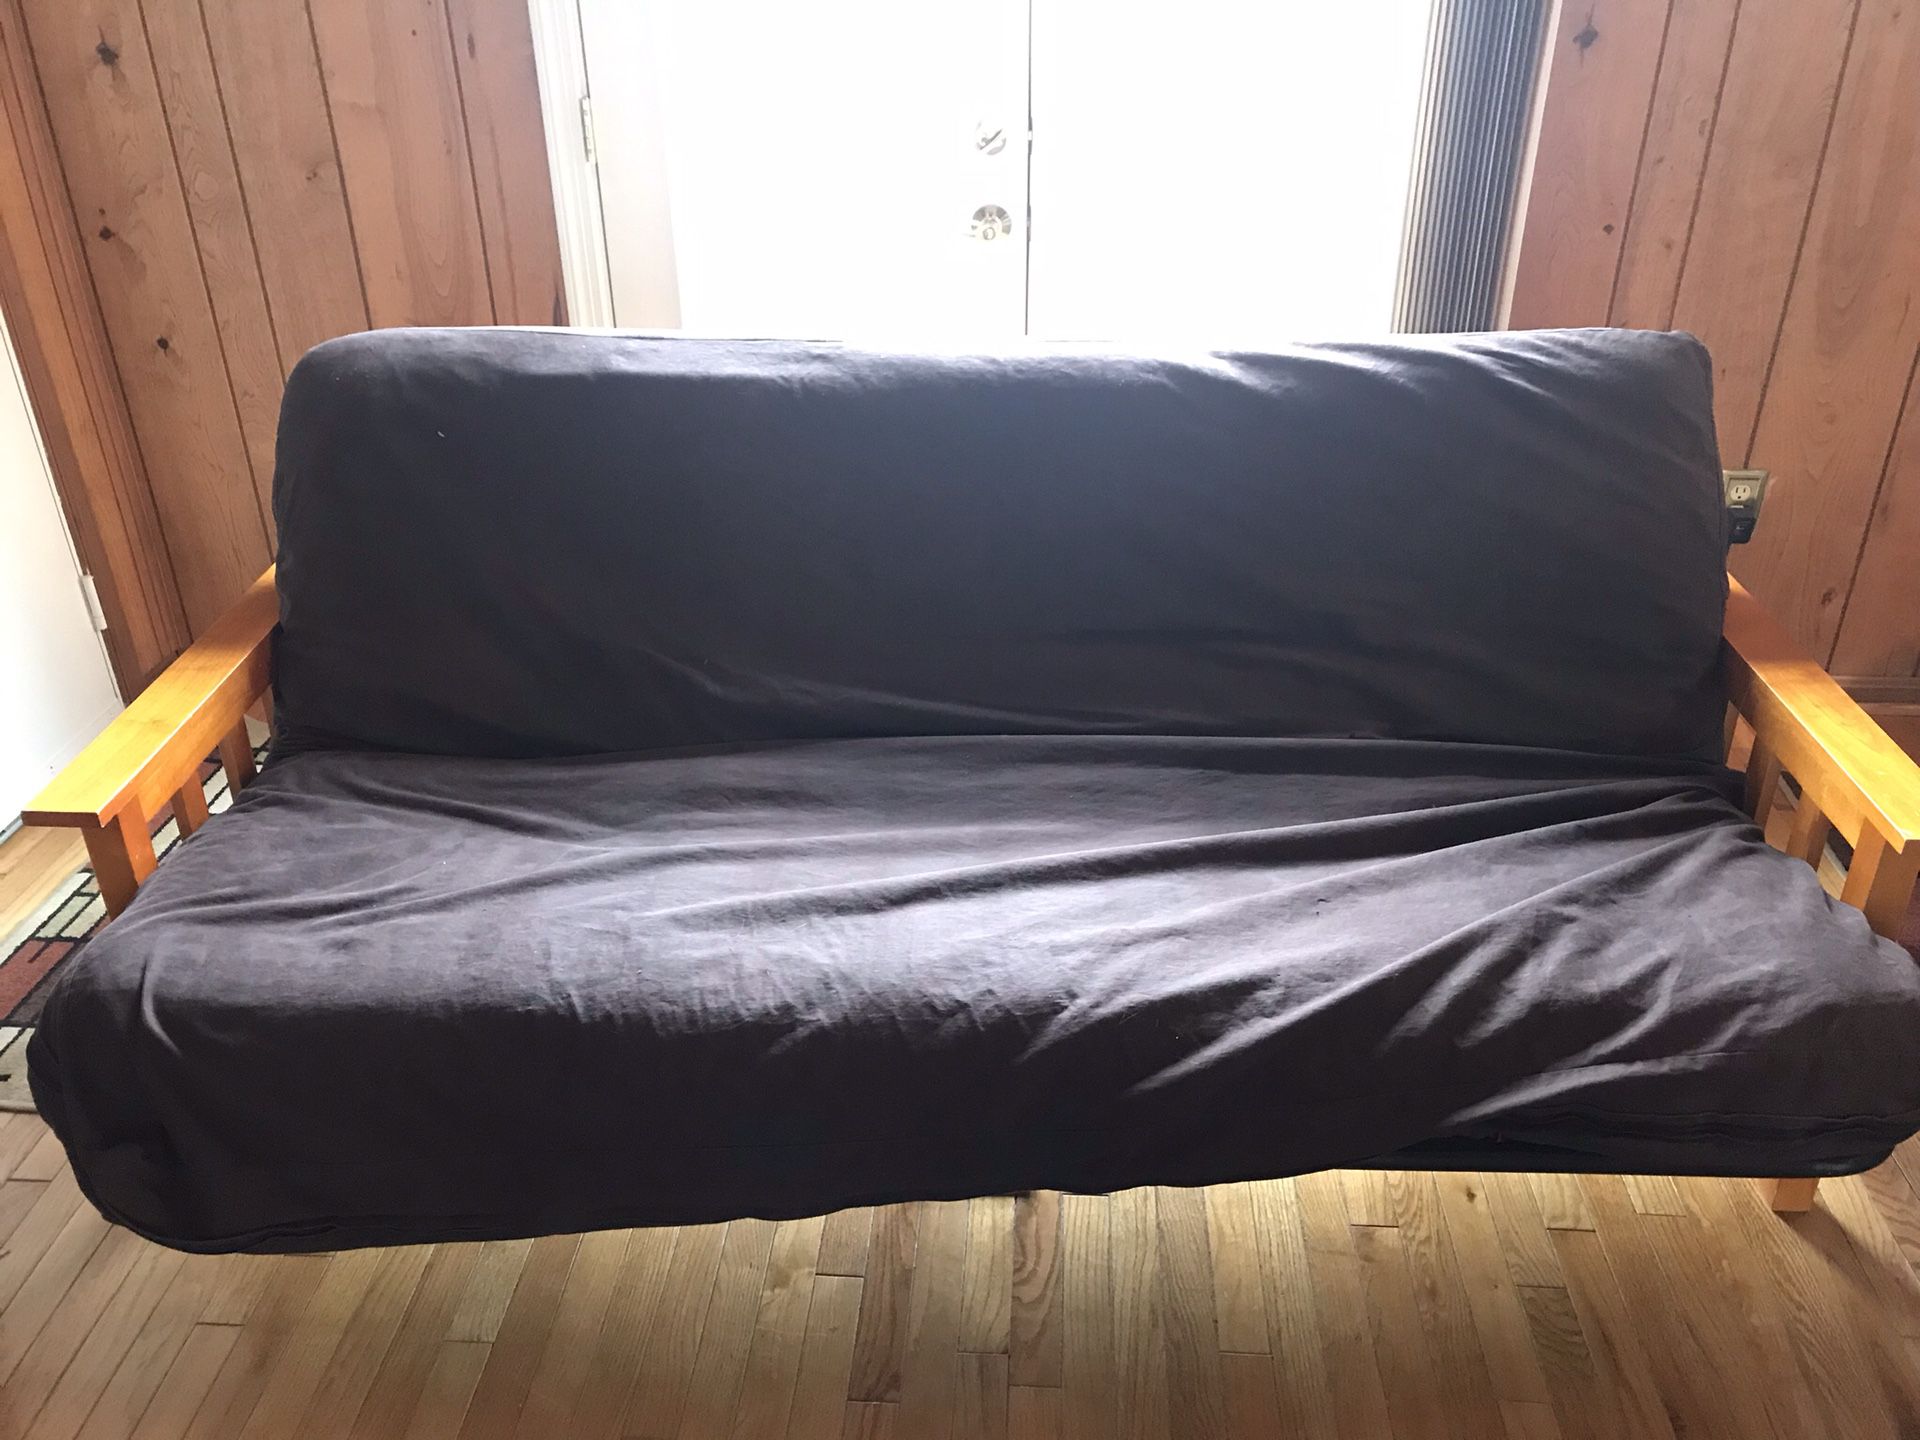 Futon with queen size mattress and cover.